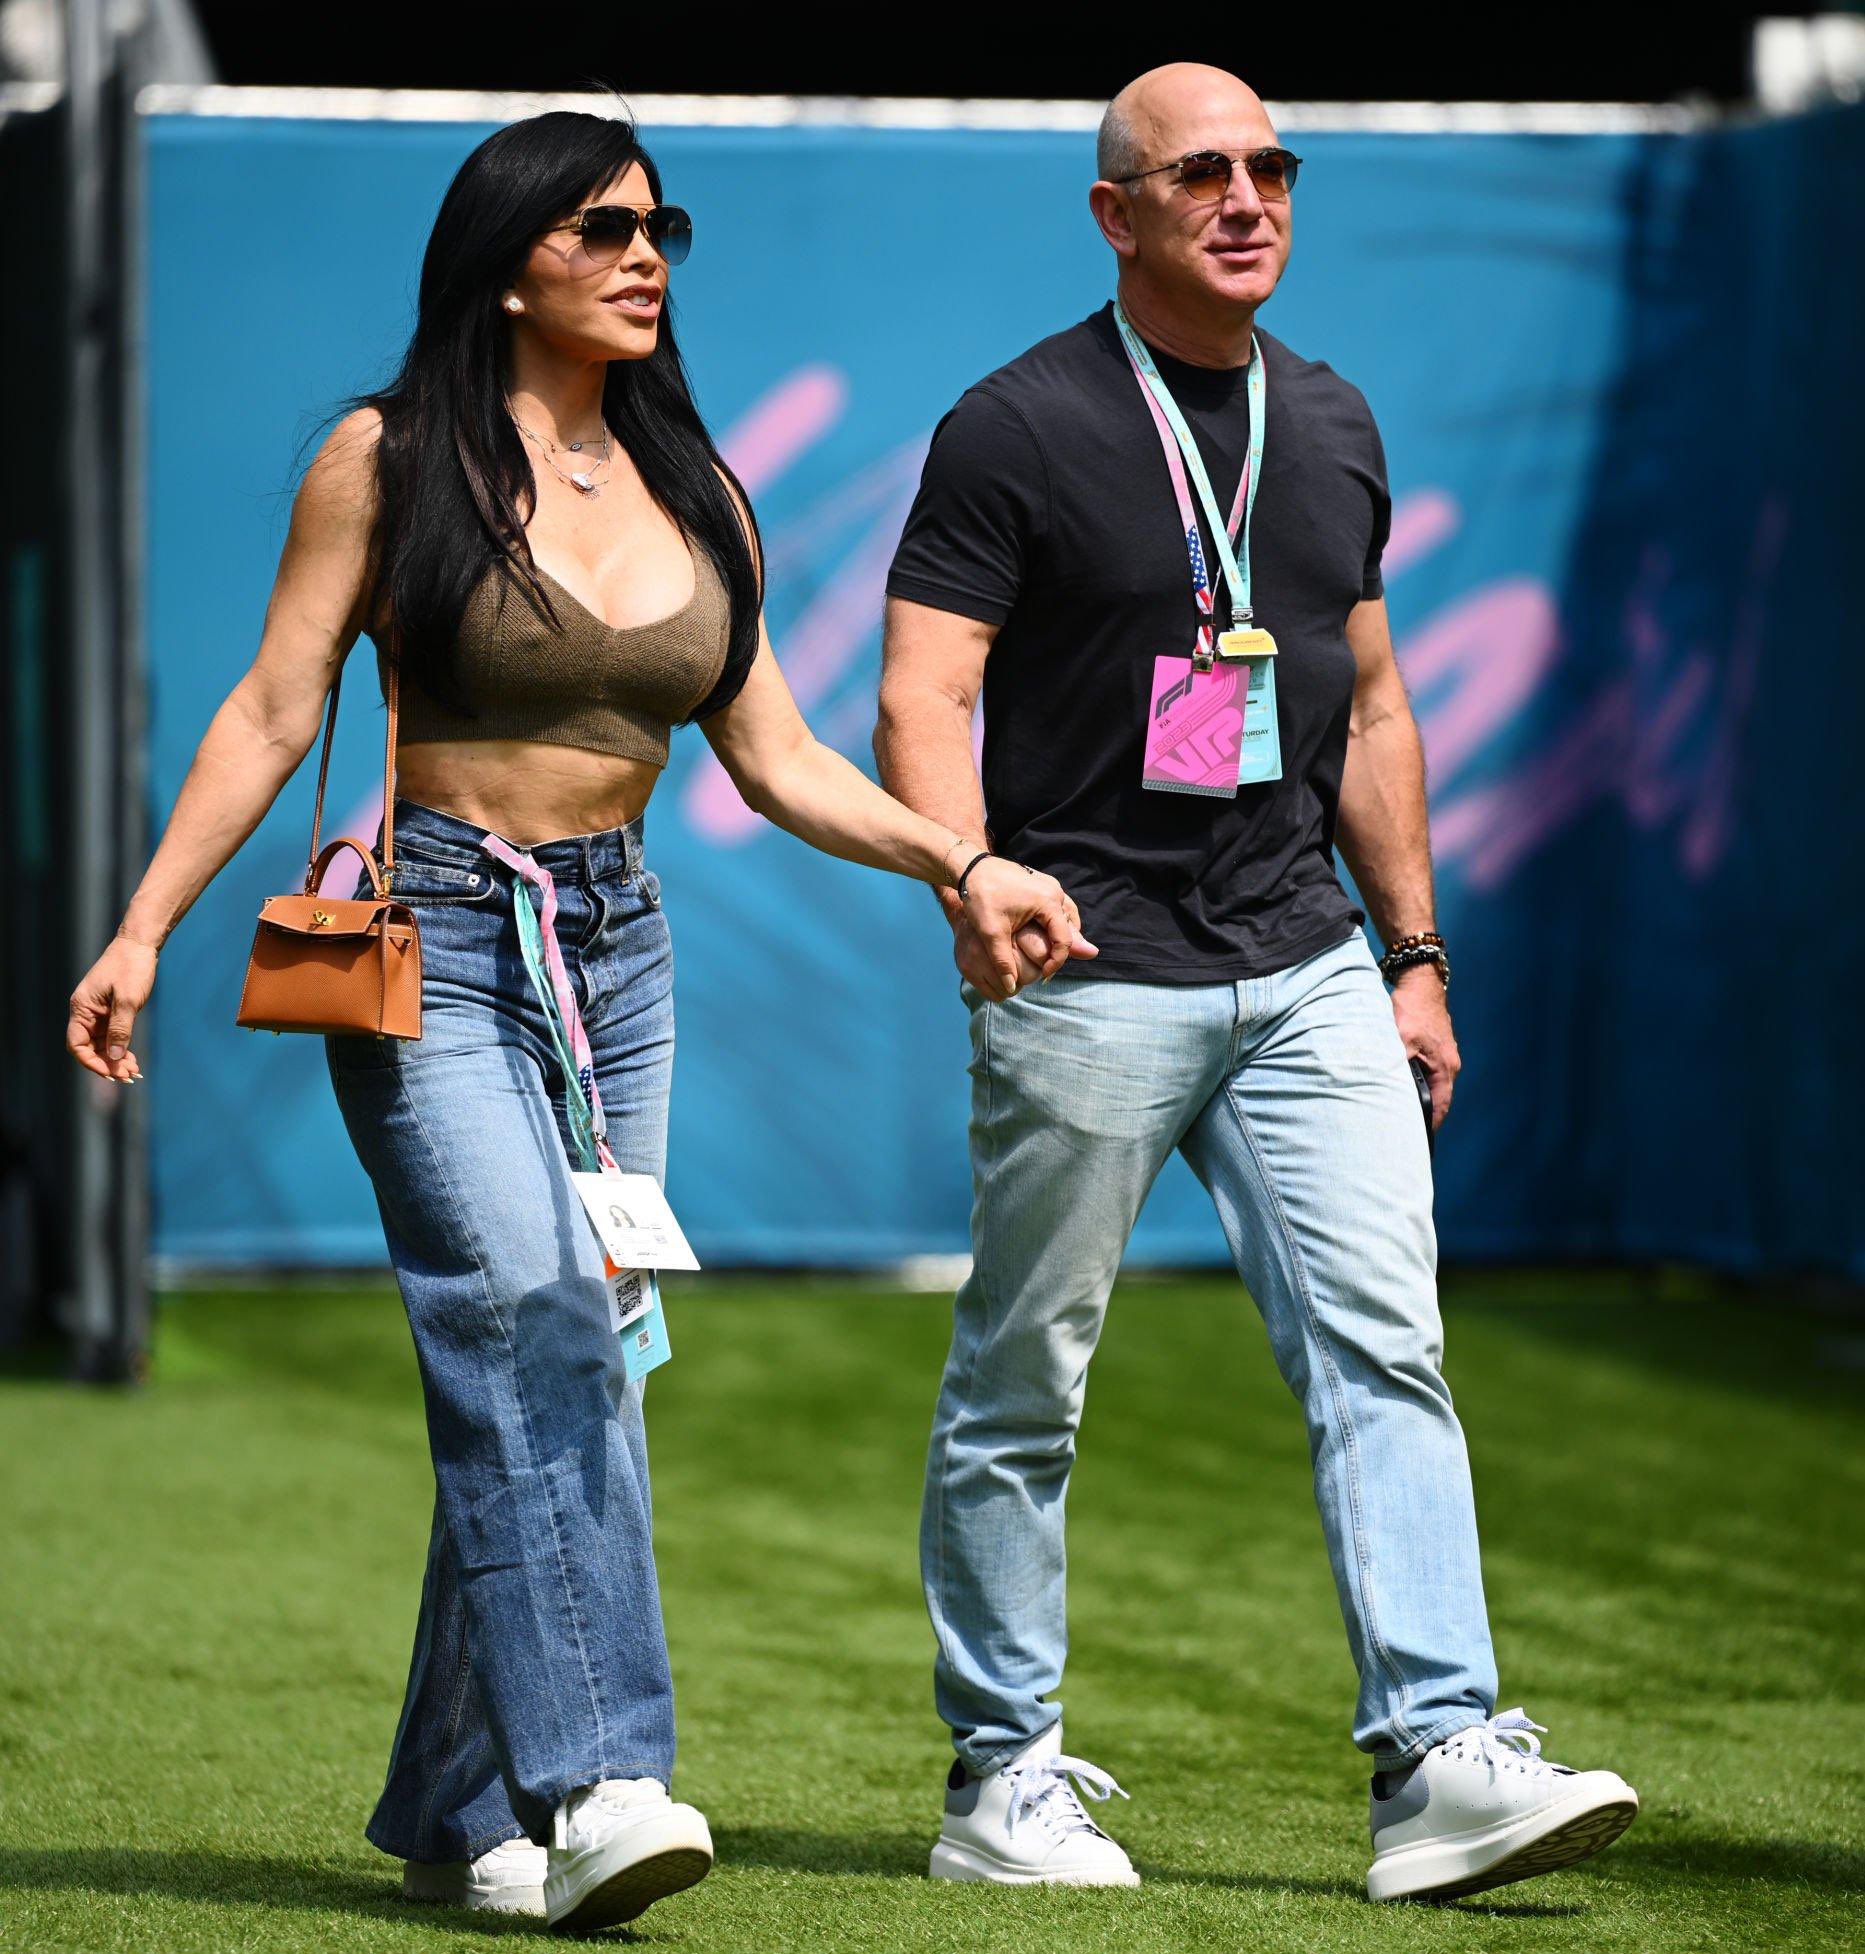 Lauren Sanchez Has A Nip Slip After Being Proposed To By Jeff Bezos